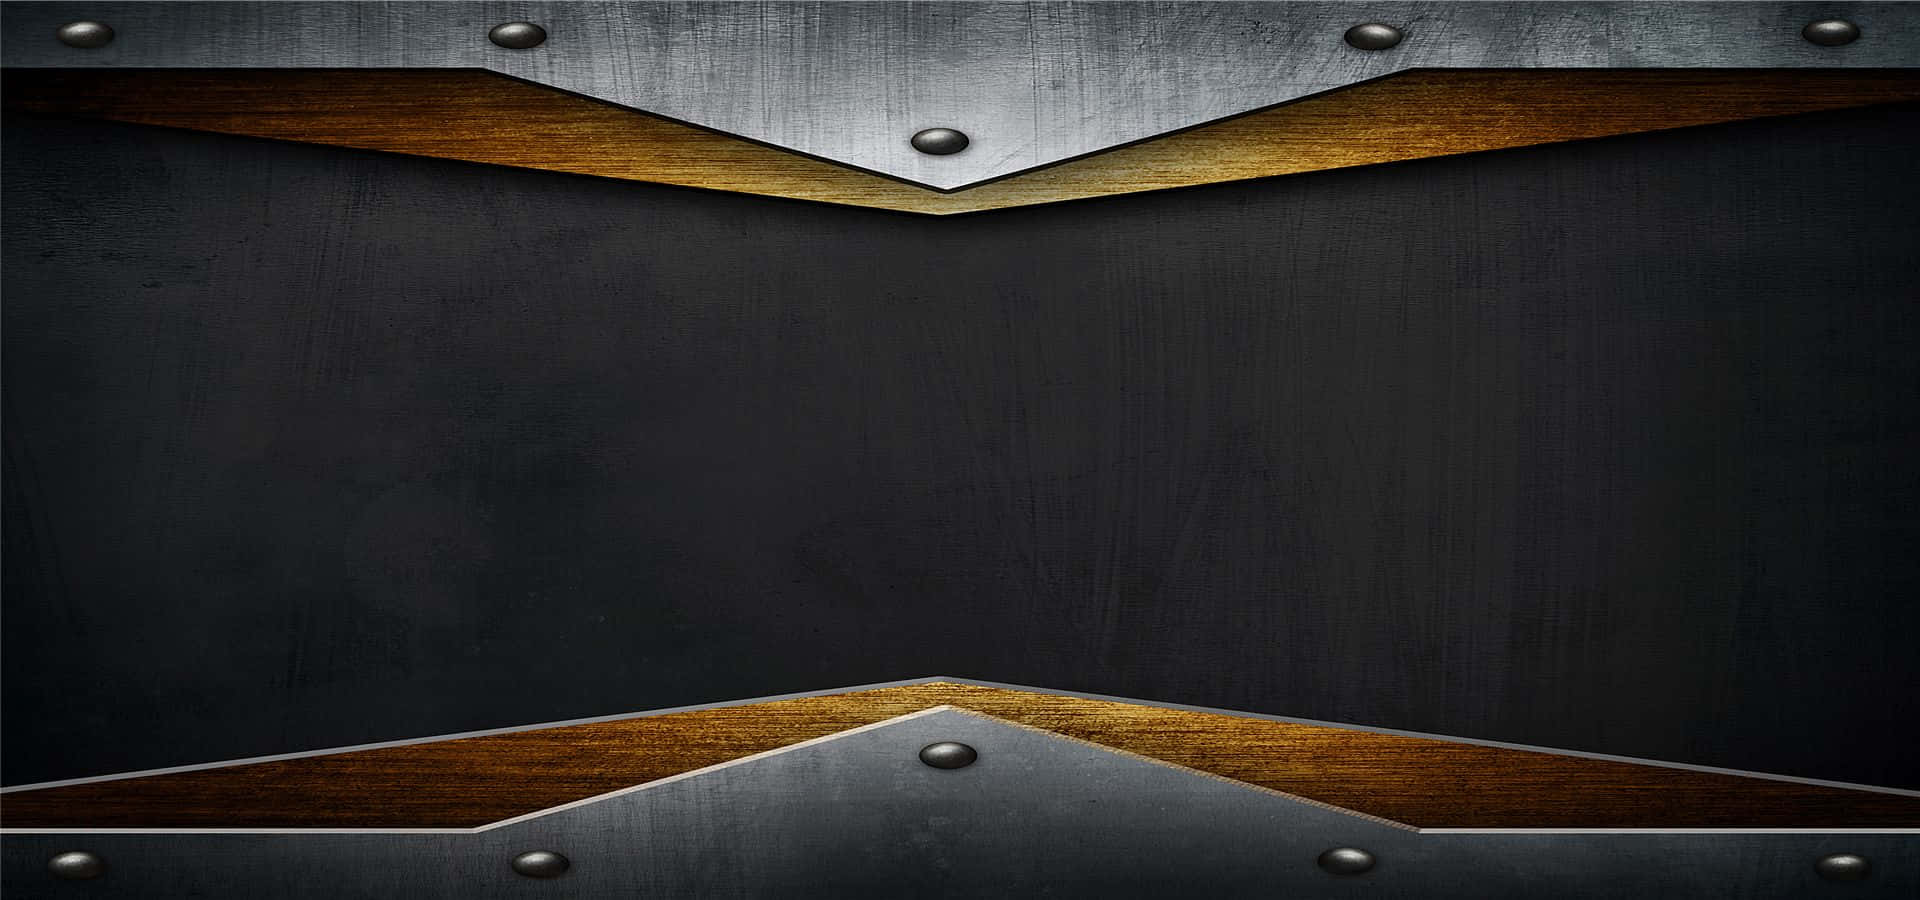 Durable and Shiny Steel Background